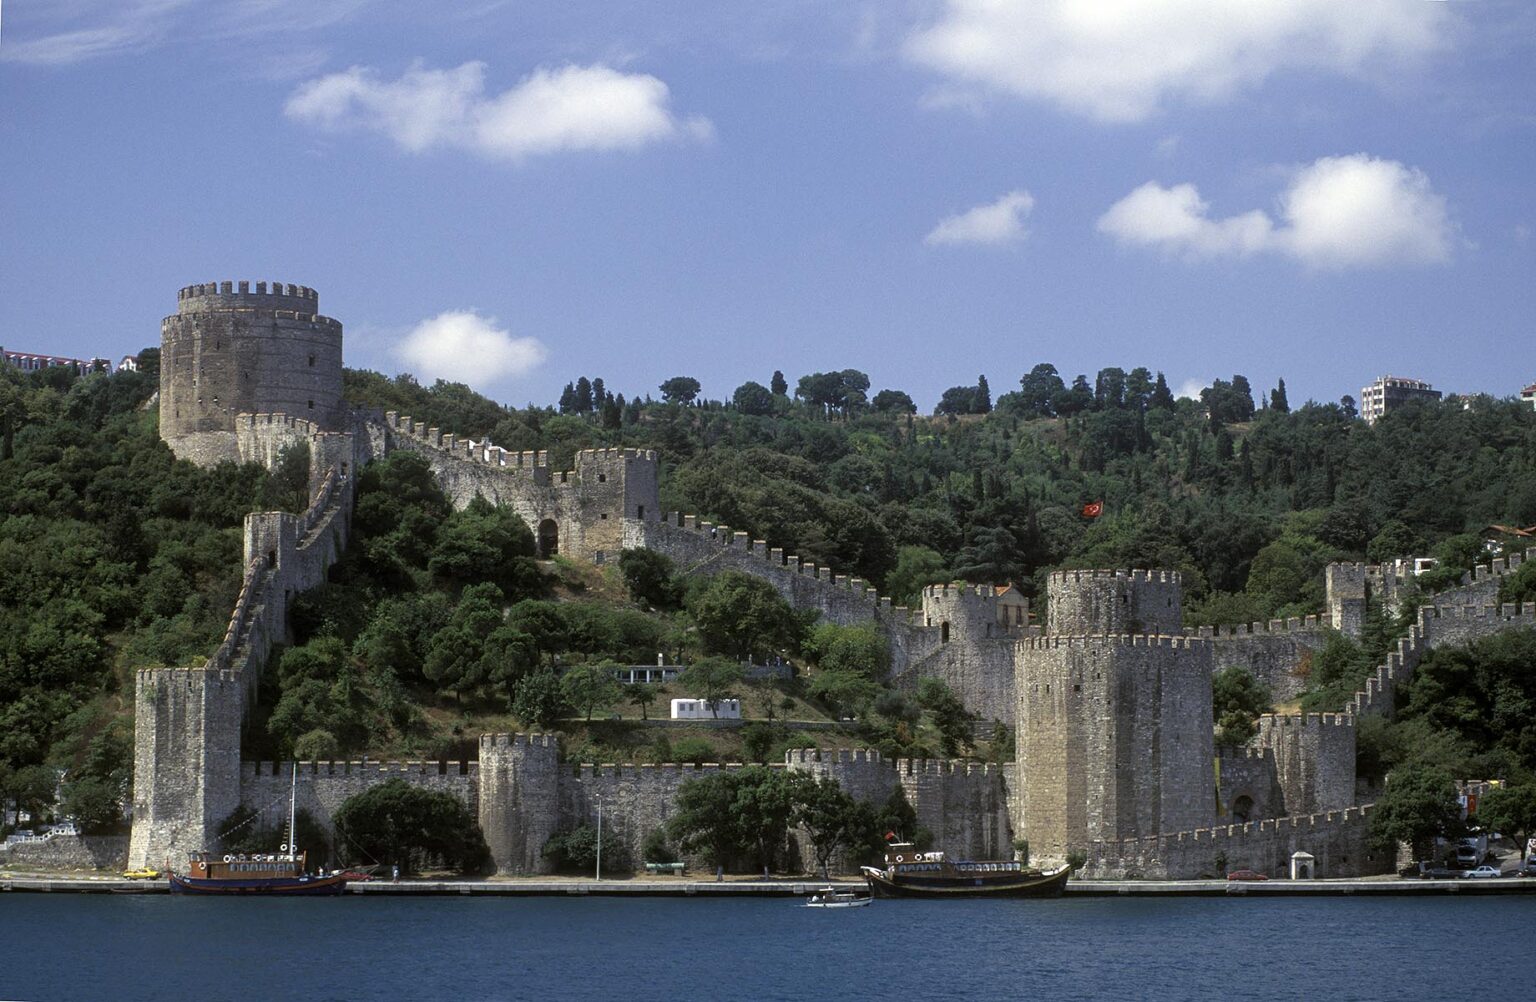 RUMELI HISARI CASTLE on the BOSPHOROUS (the waterway which joins the Mediterranean and the Black Sea)- TURKEY